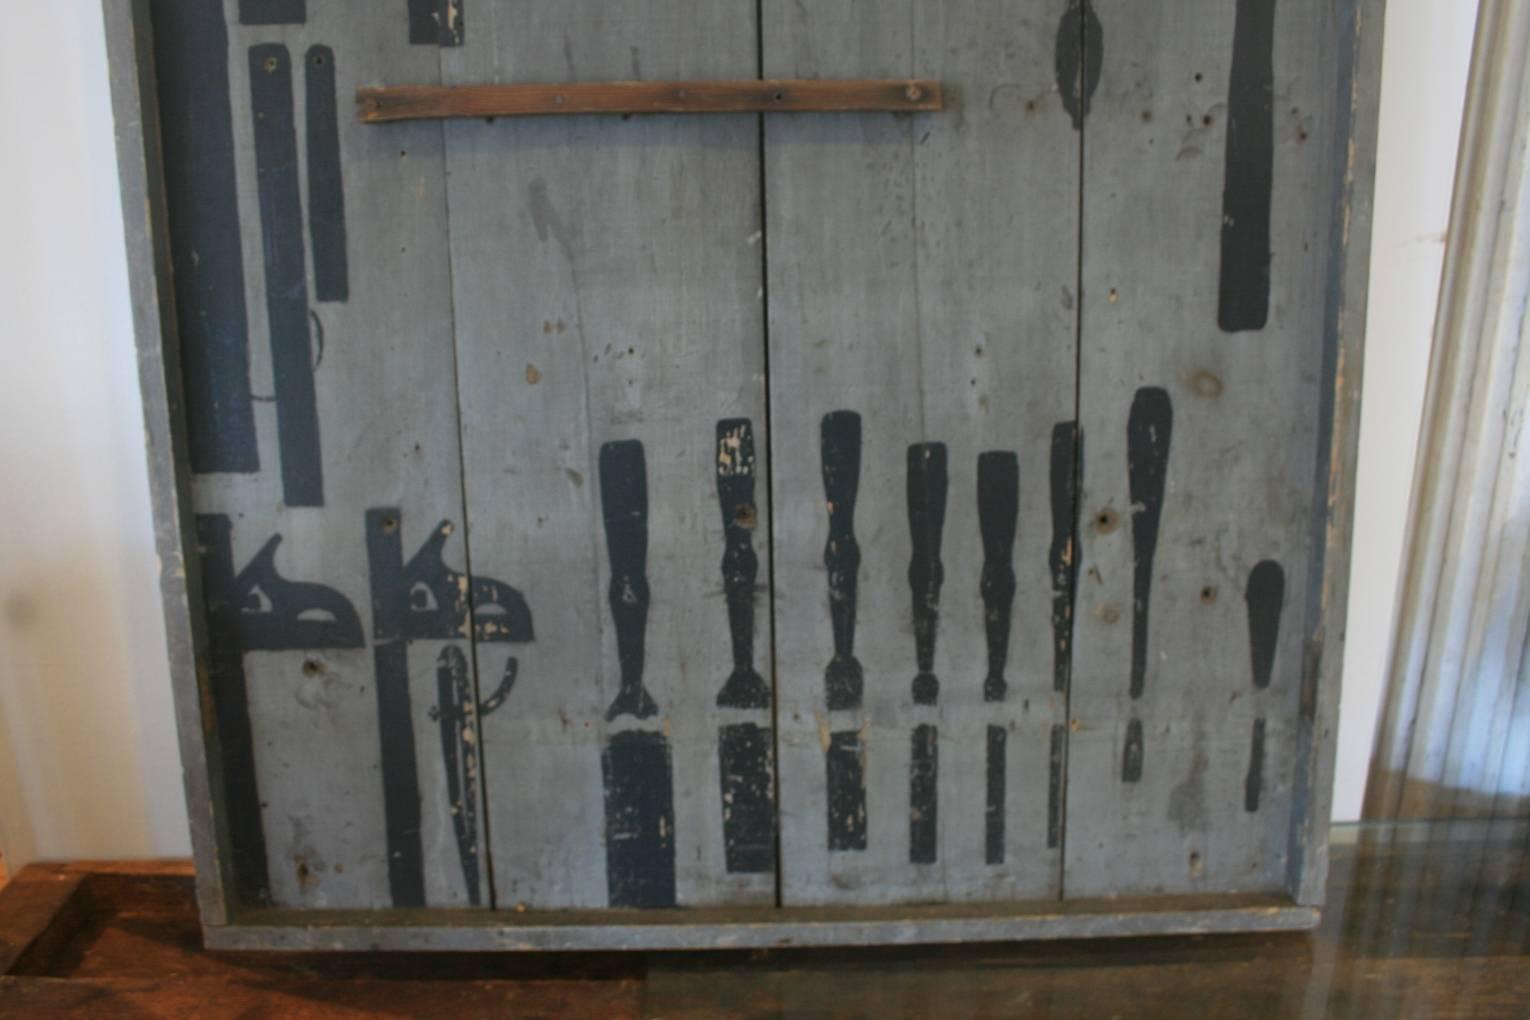 Industrial /Folk Art tool organizer panel. Tool silhouette in black paint against gray background makes a kind of found art wall sculpture. All original paint. This one was probably made, circa 1930.